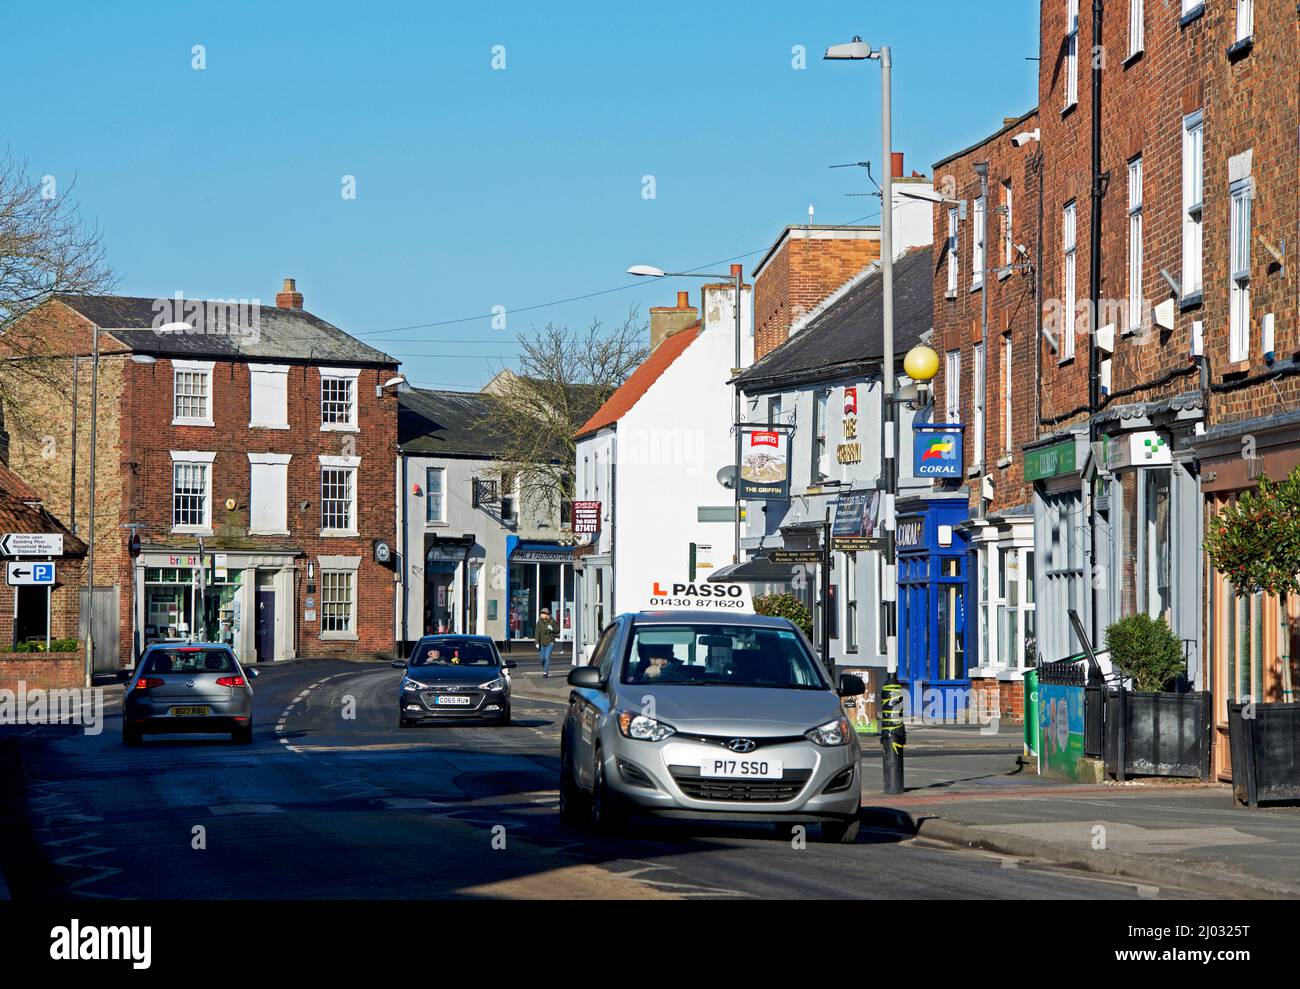 A learner driver in Market Weighton, East Yorkshire, England UK Stock Photo